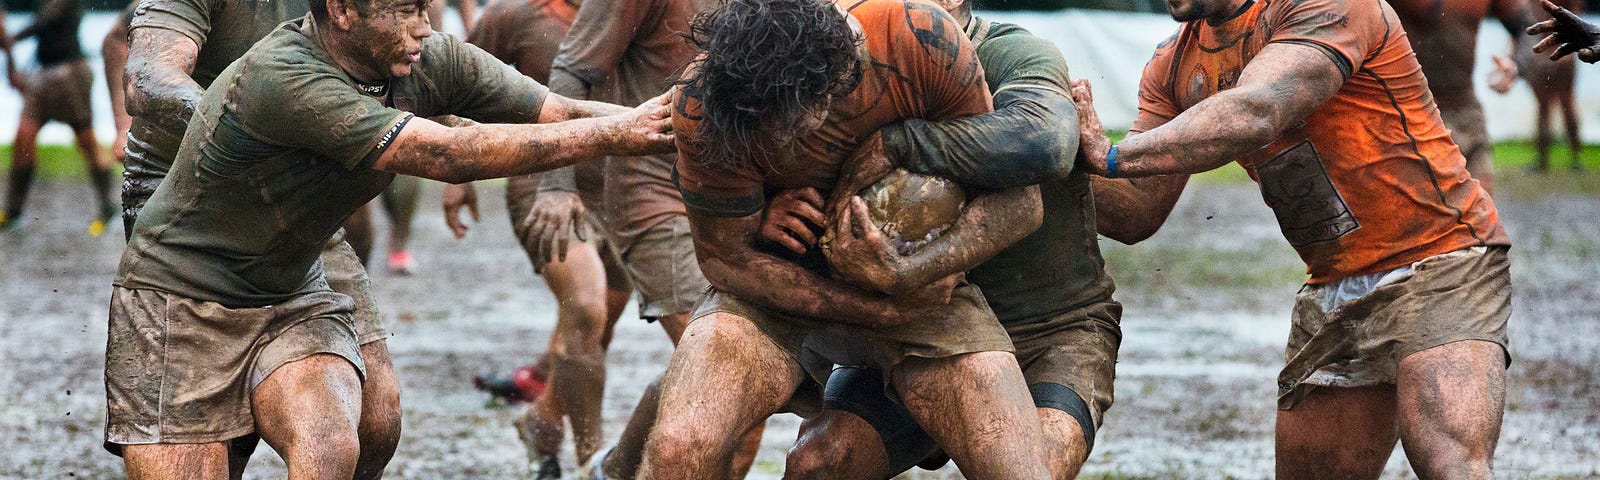 Guys playing rugby in the mud